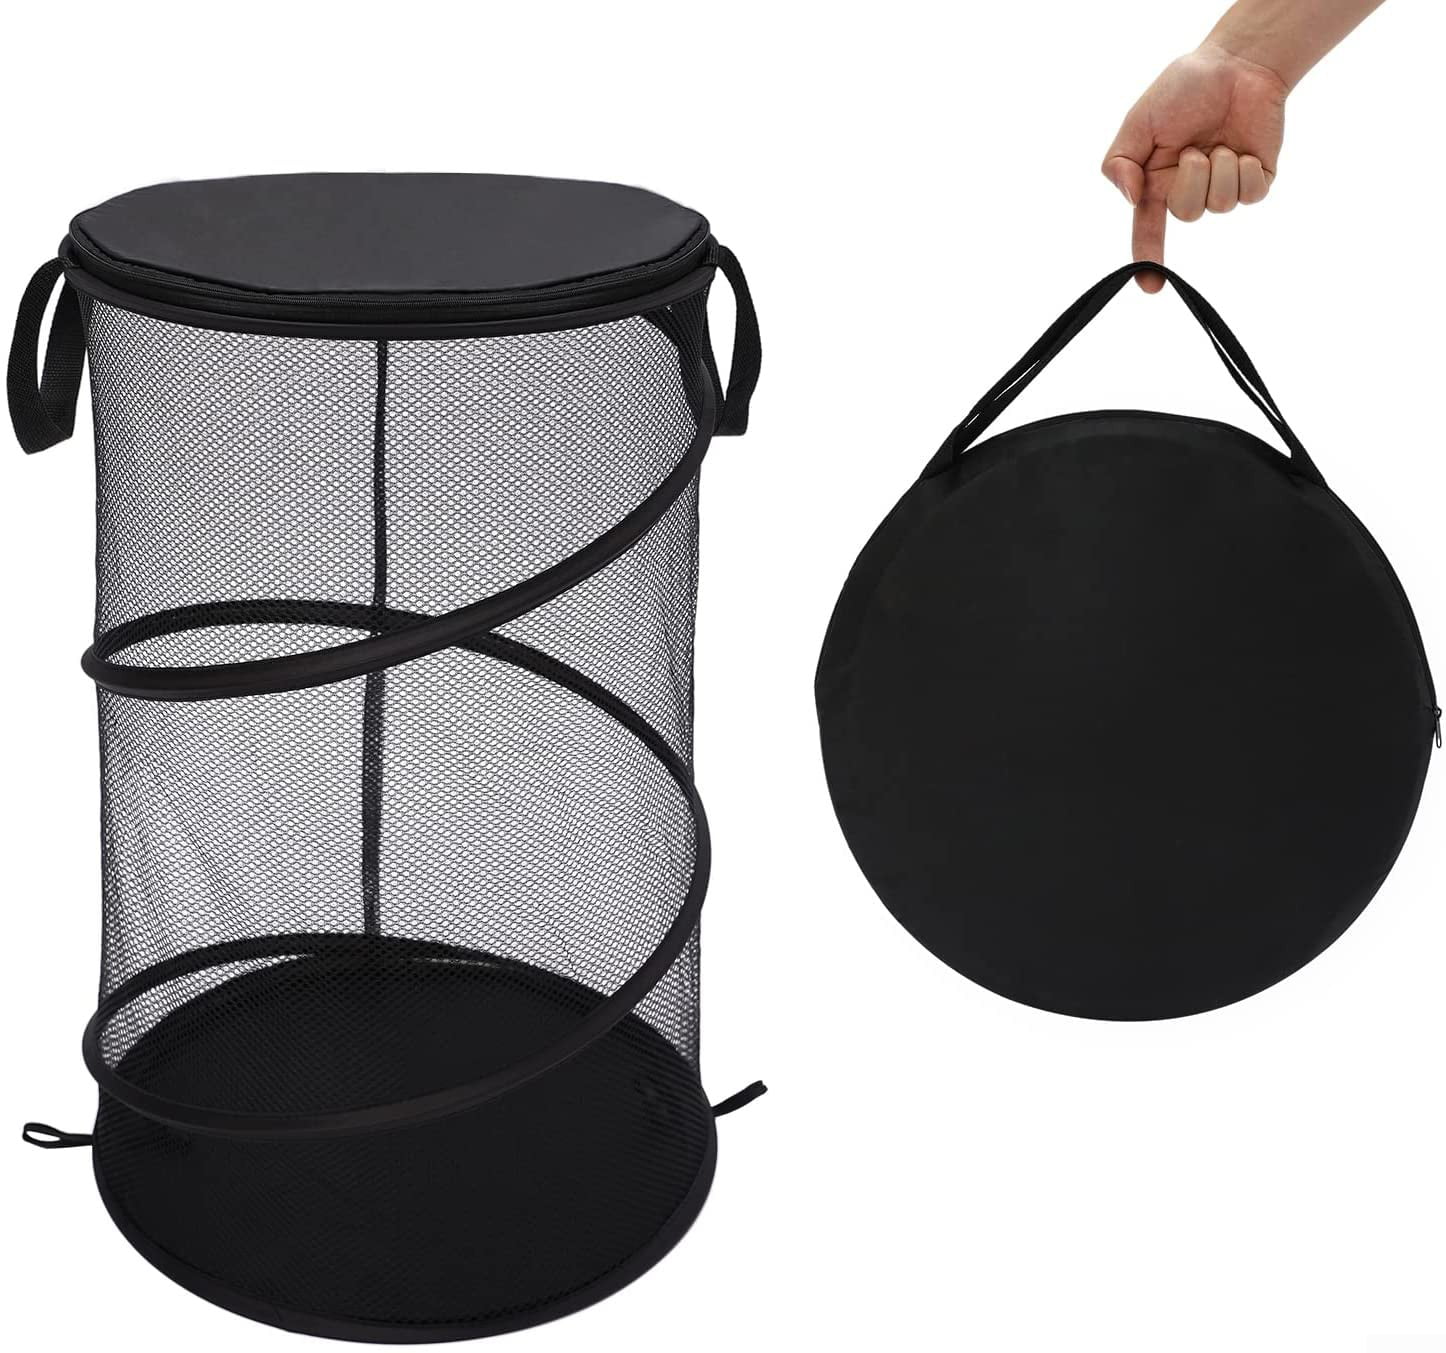 Durable Handles Details about   Mesh Popup Laundry Hamper Portable Collapsible for Storage 